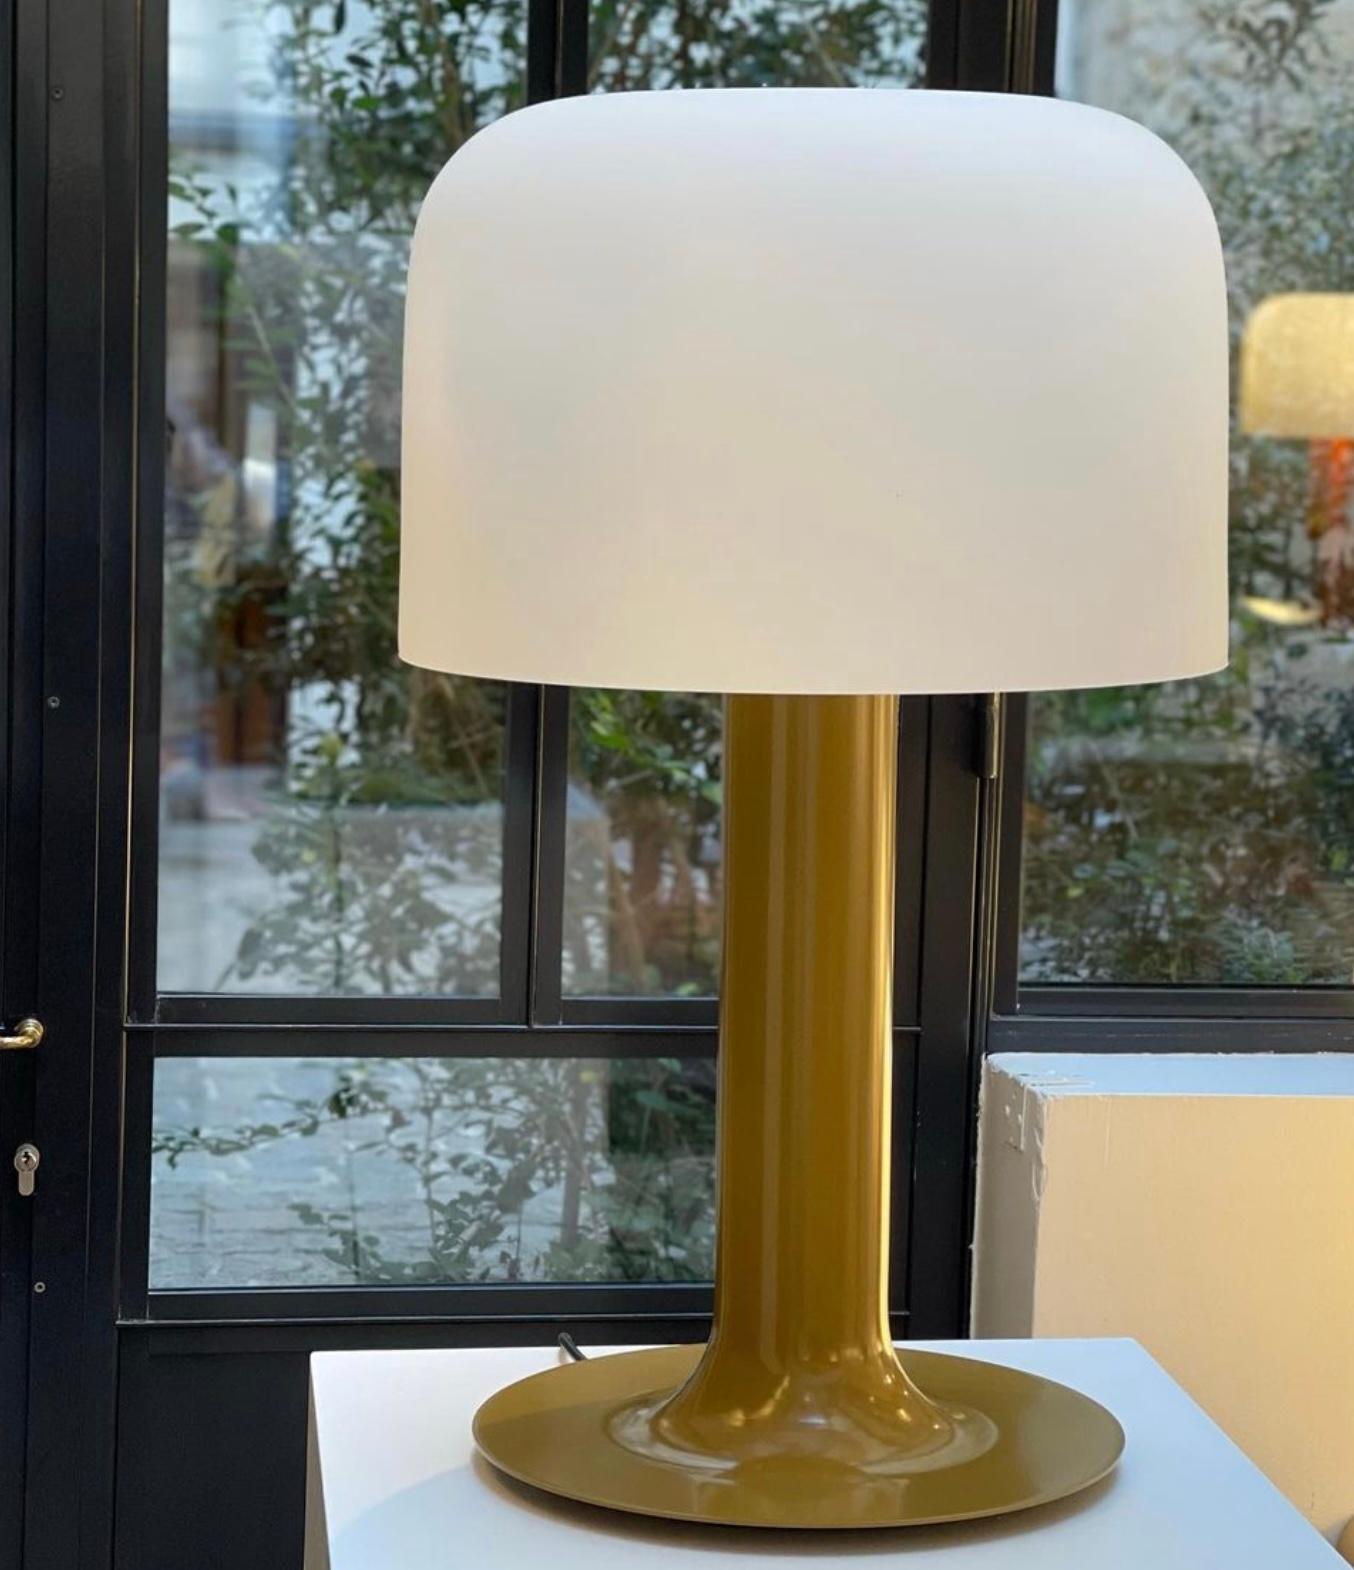 Michel Mortier 10497 metal and glass table lamp for Disderot in chamois.

Originally designed in 1972, this sculptural table lamp is a newly produced numbered edition with an authentication certificate. Made in France by Disderot with many of the